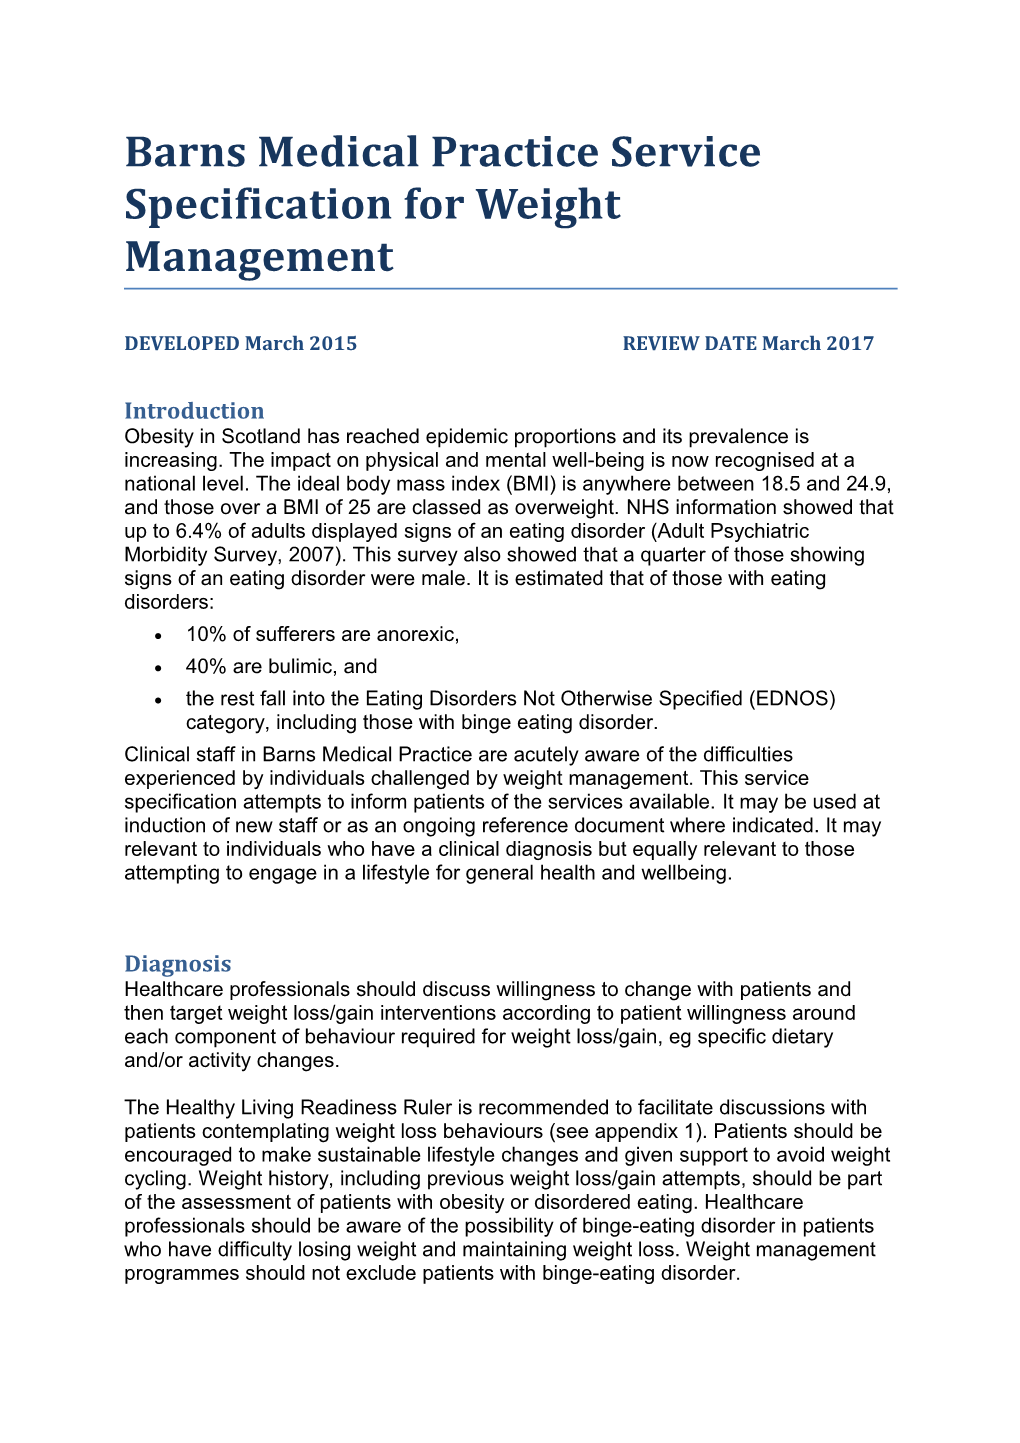 Barns Medical Practice Service Specification for Weight Management